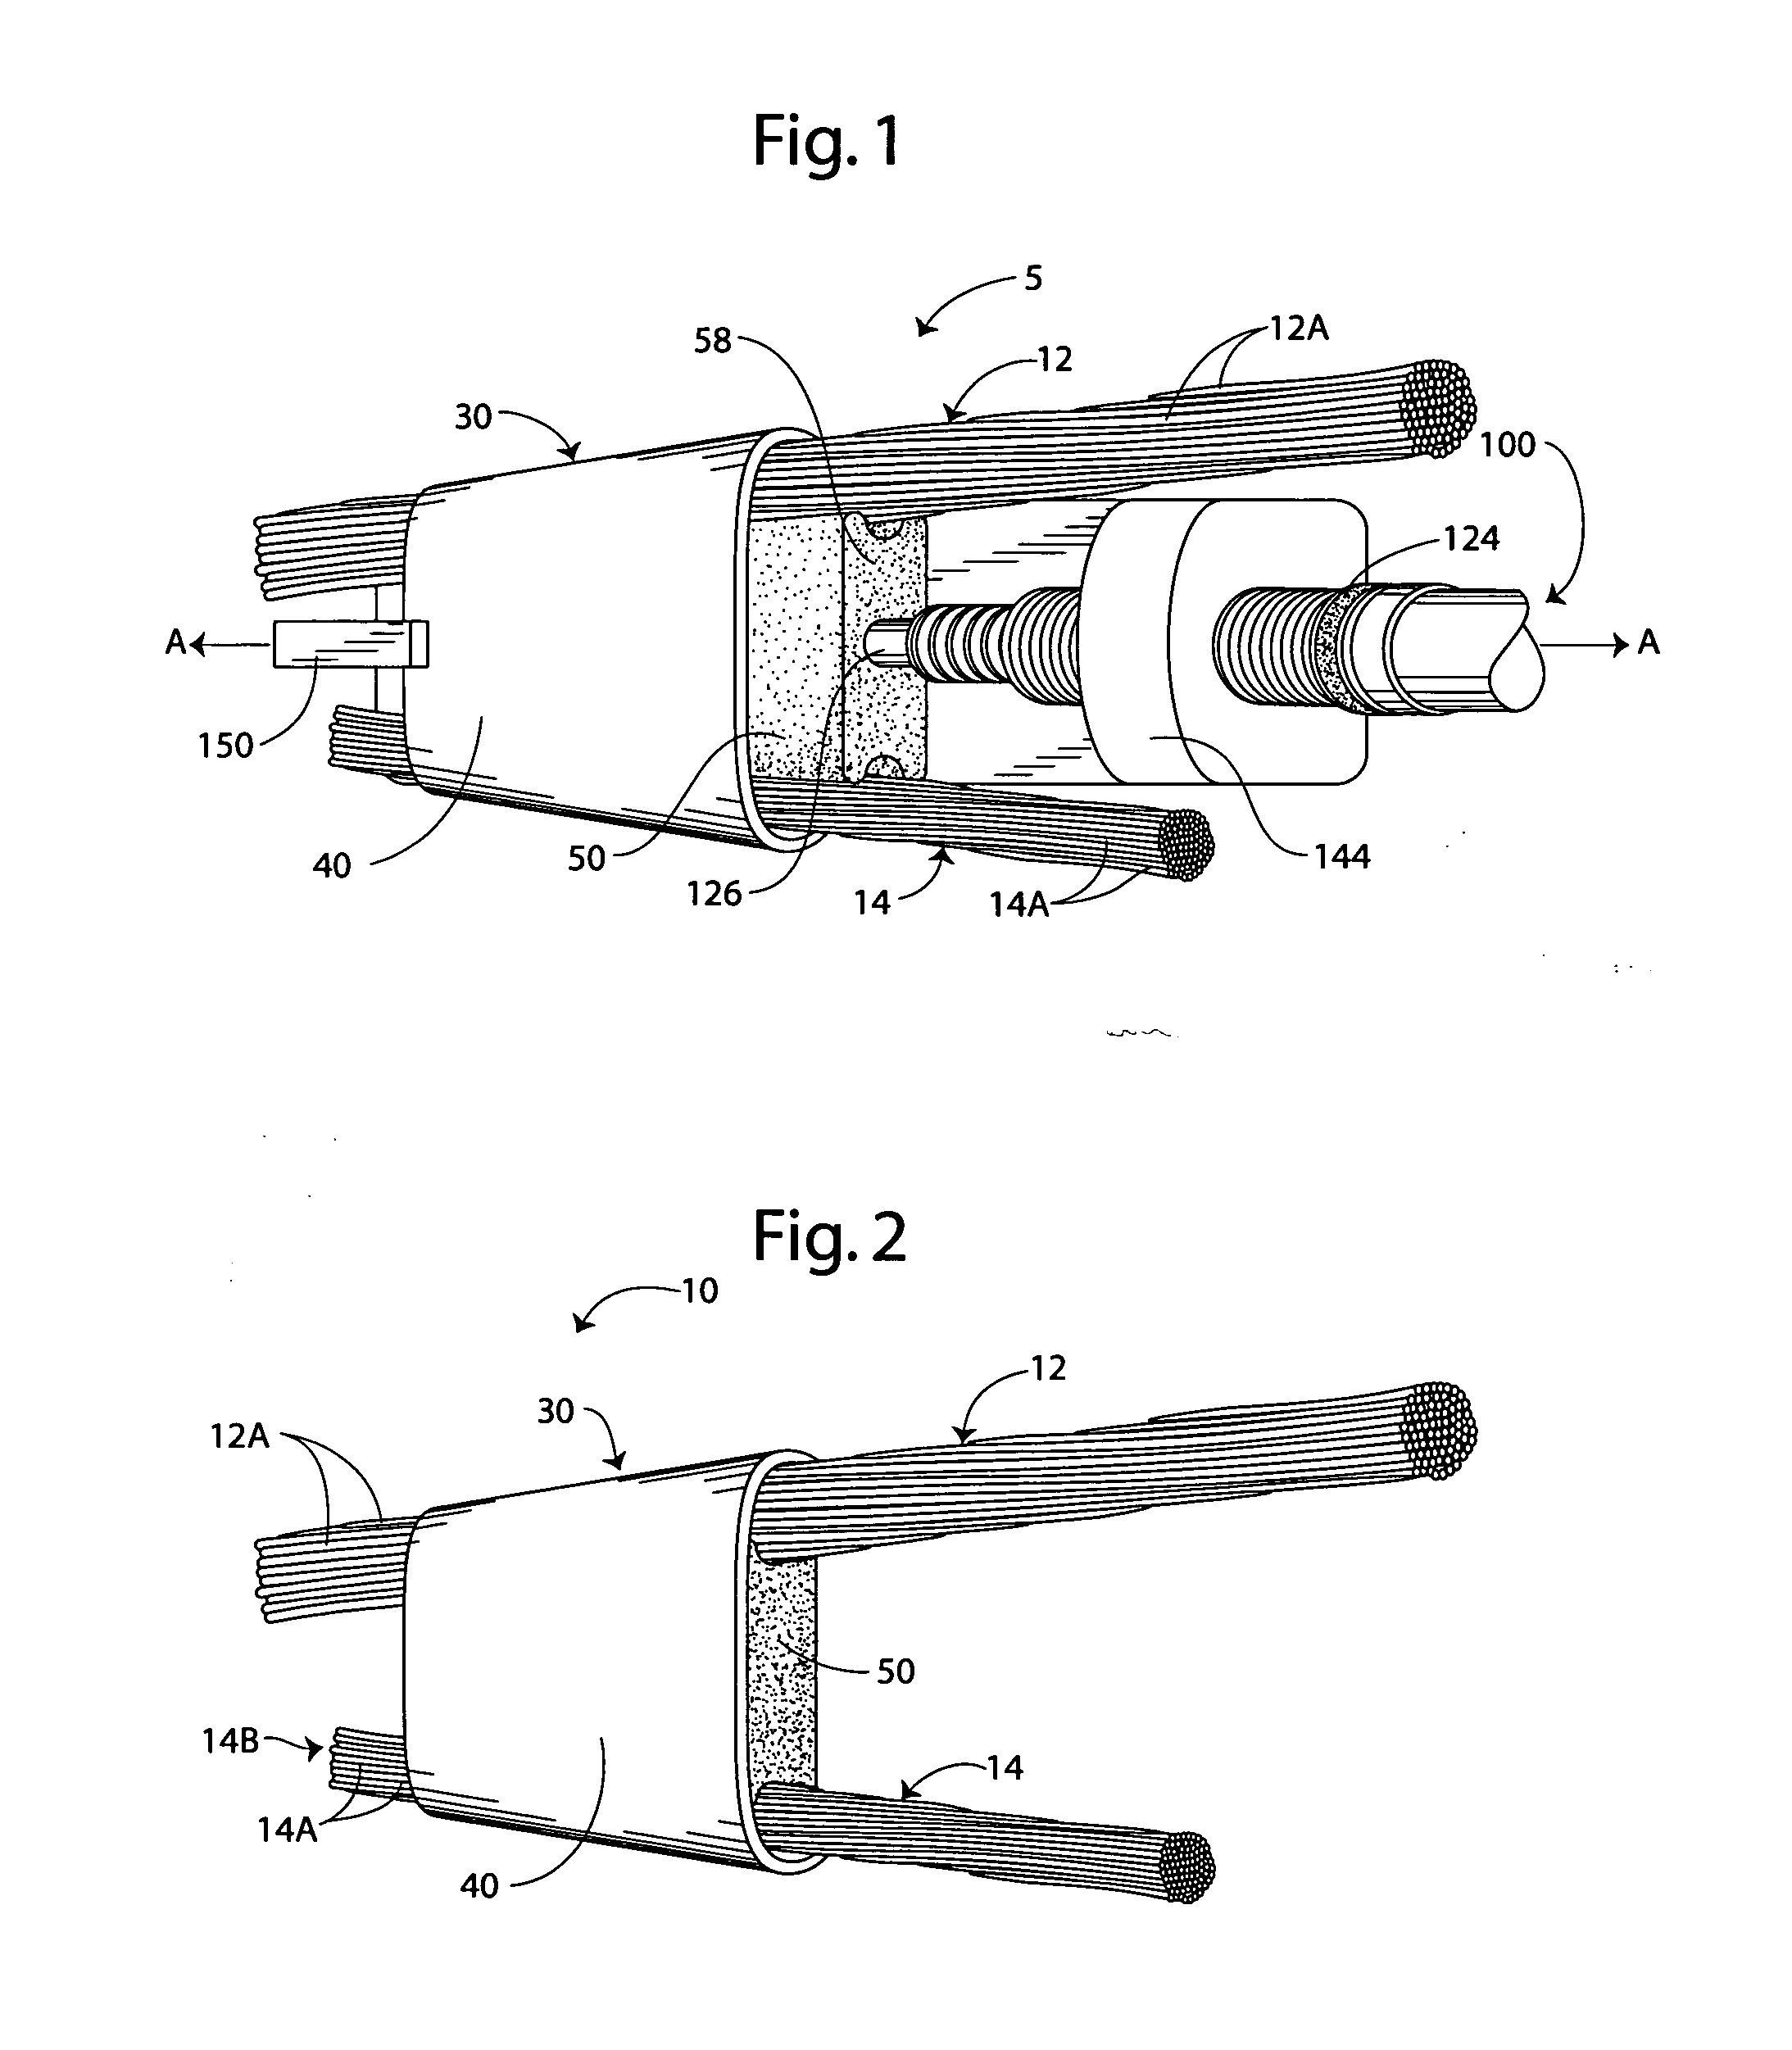 Methods and apparatus for connecting conductors using a wedge connector